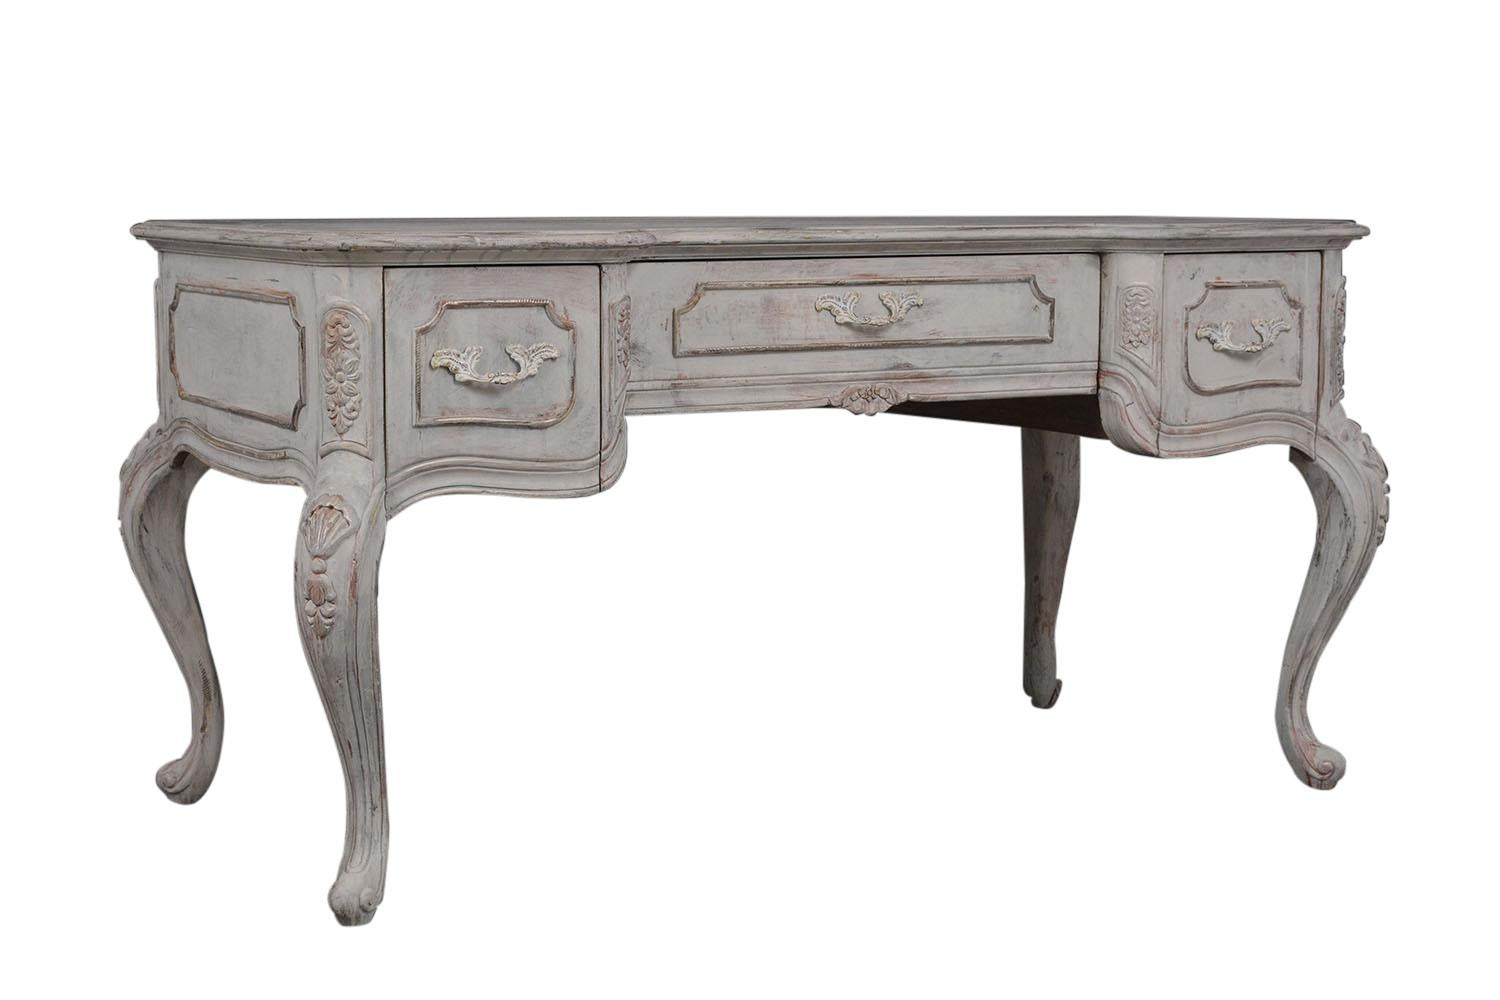 This Vintage French Louis XV Desk is made out of solid wood and has been newly painted in an off gray color with a beautiful hand-done distressed finish. The desk features a solid beveled wooden top, two side drawers & large center drawer front